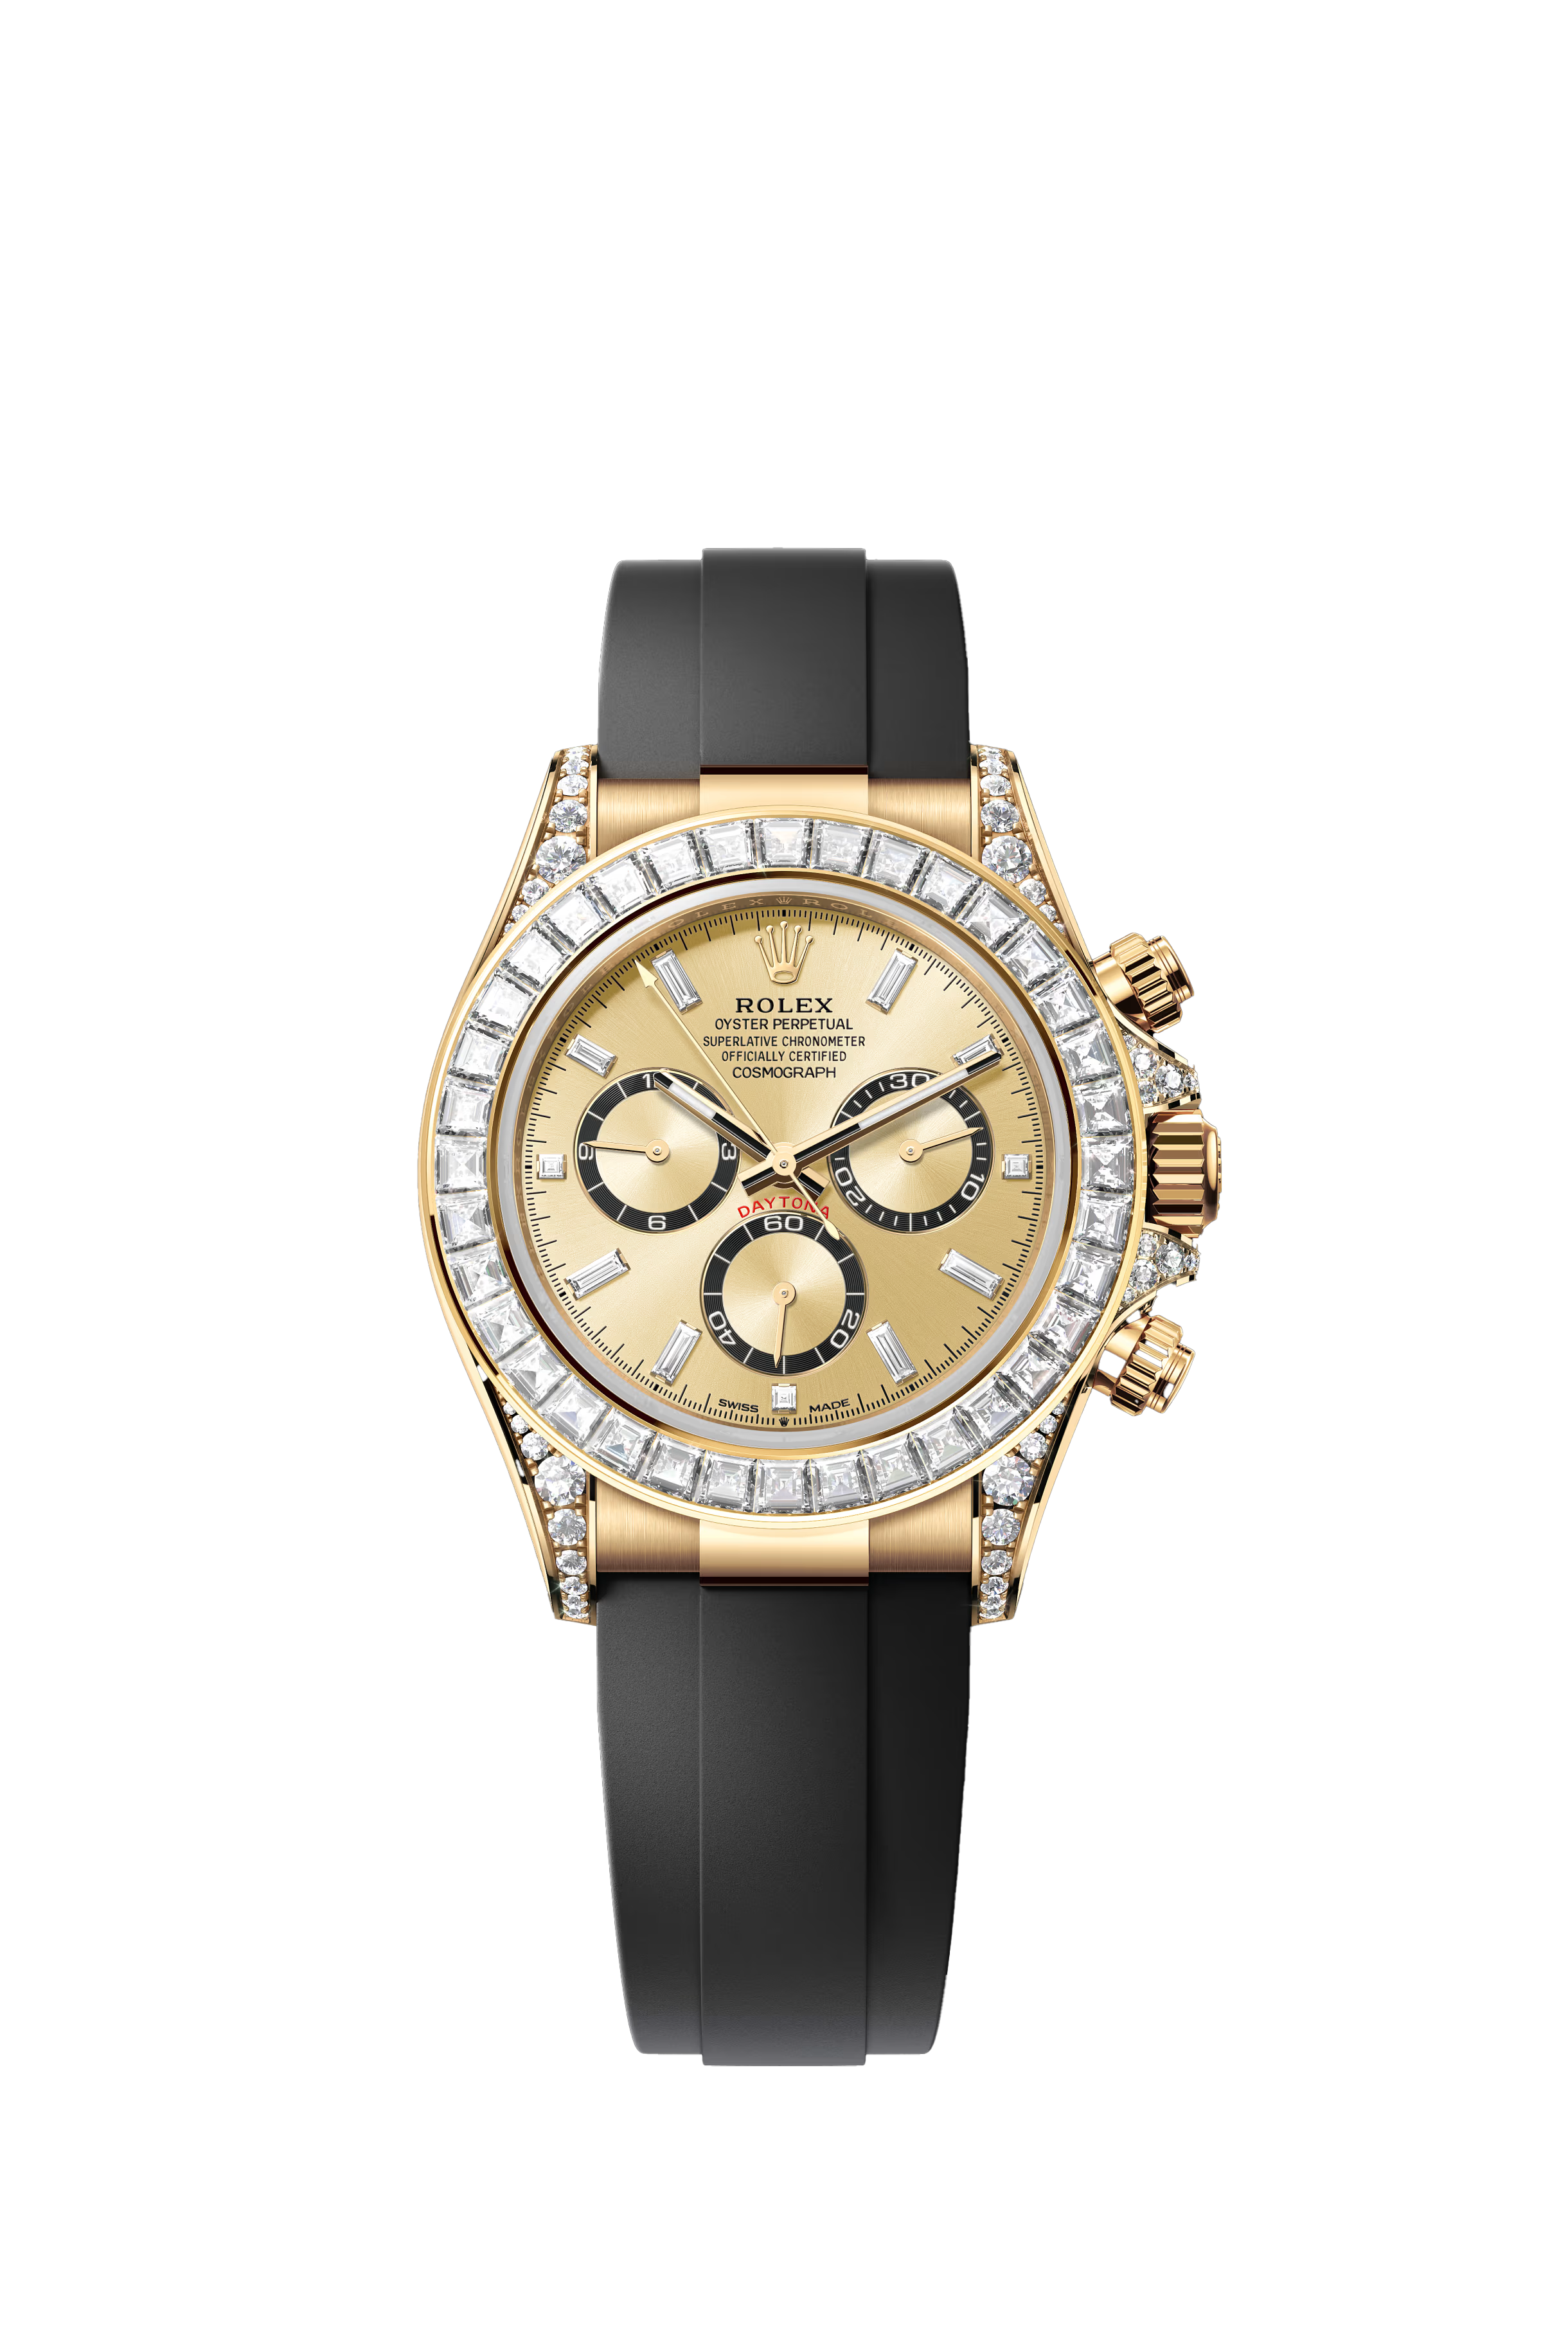 Rolex Cosmograph Daytona Oyster, 40 mm, yellow gold and diamonds Reference 126538TBR